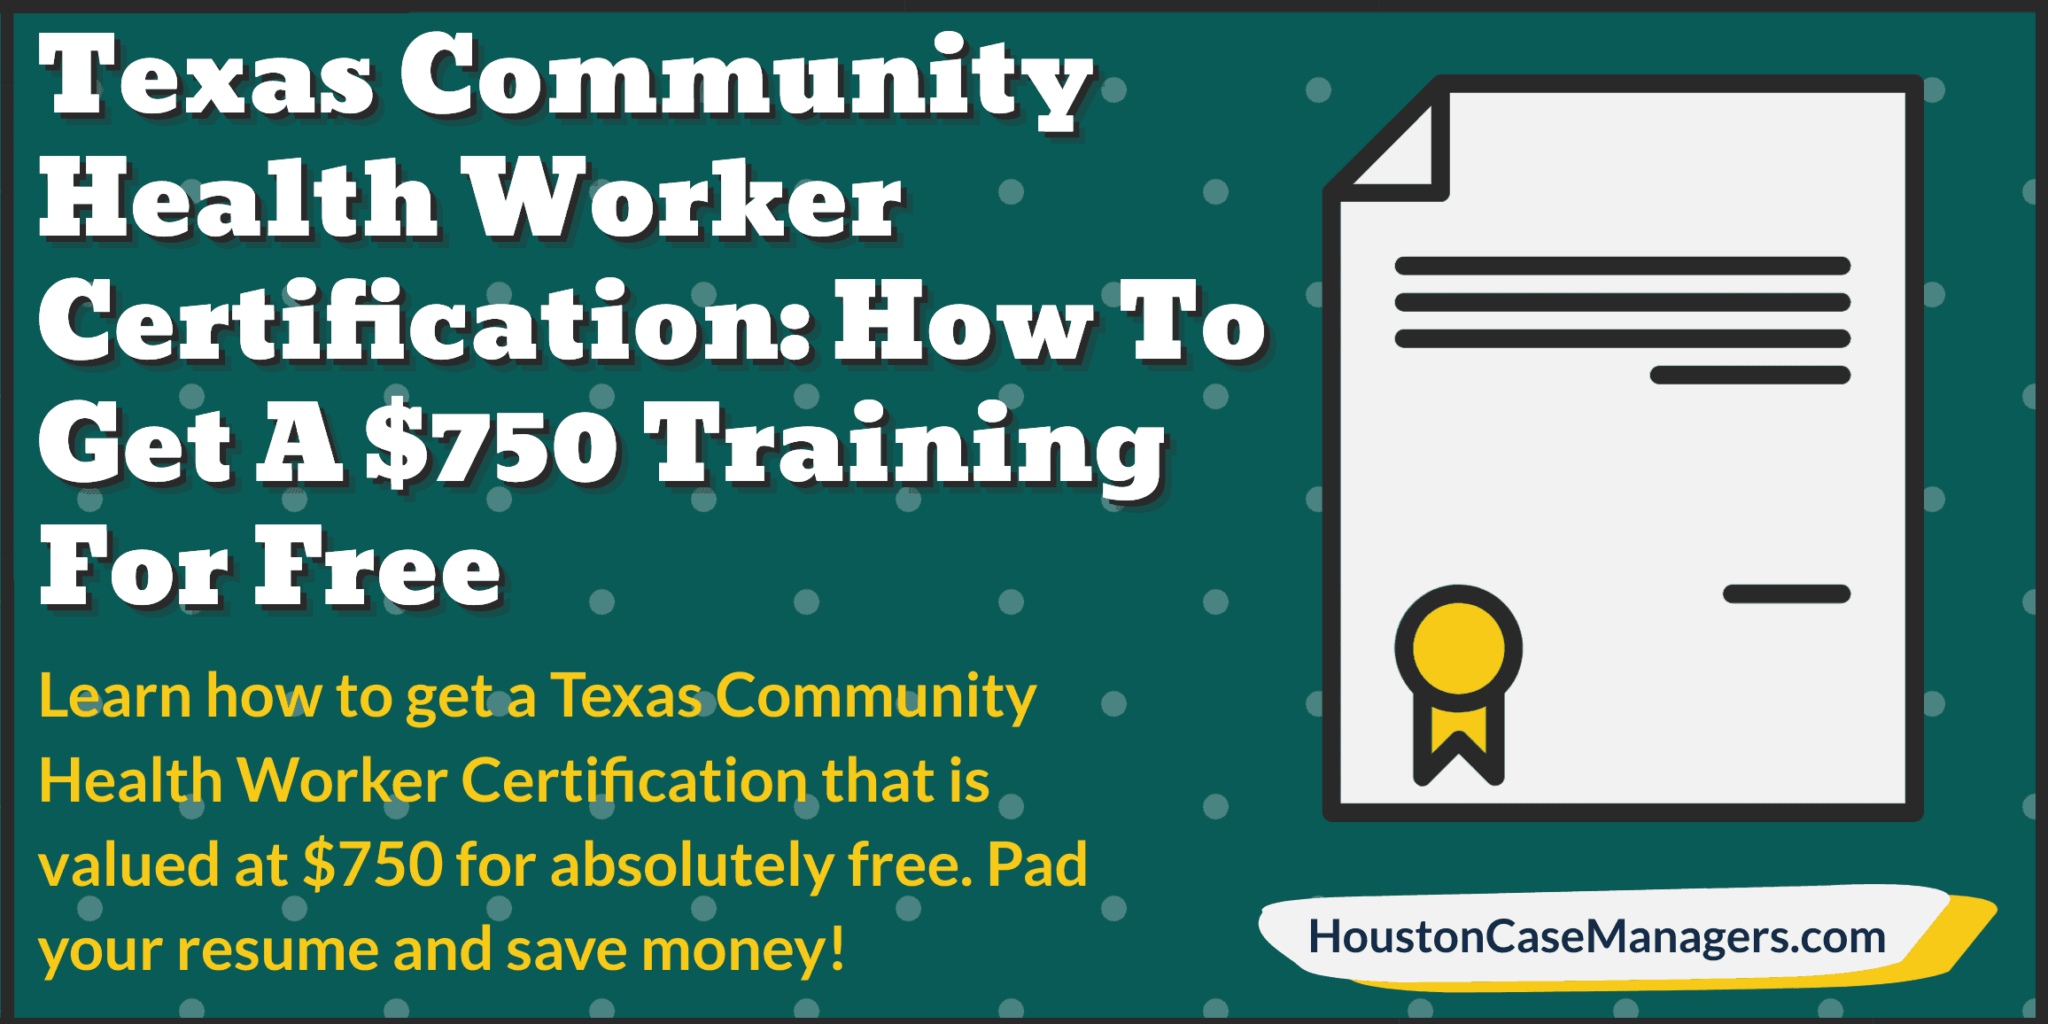 Texas Community Health Worker Certification: $750 Training For Free